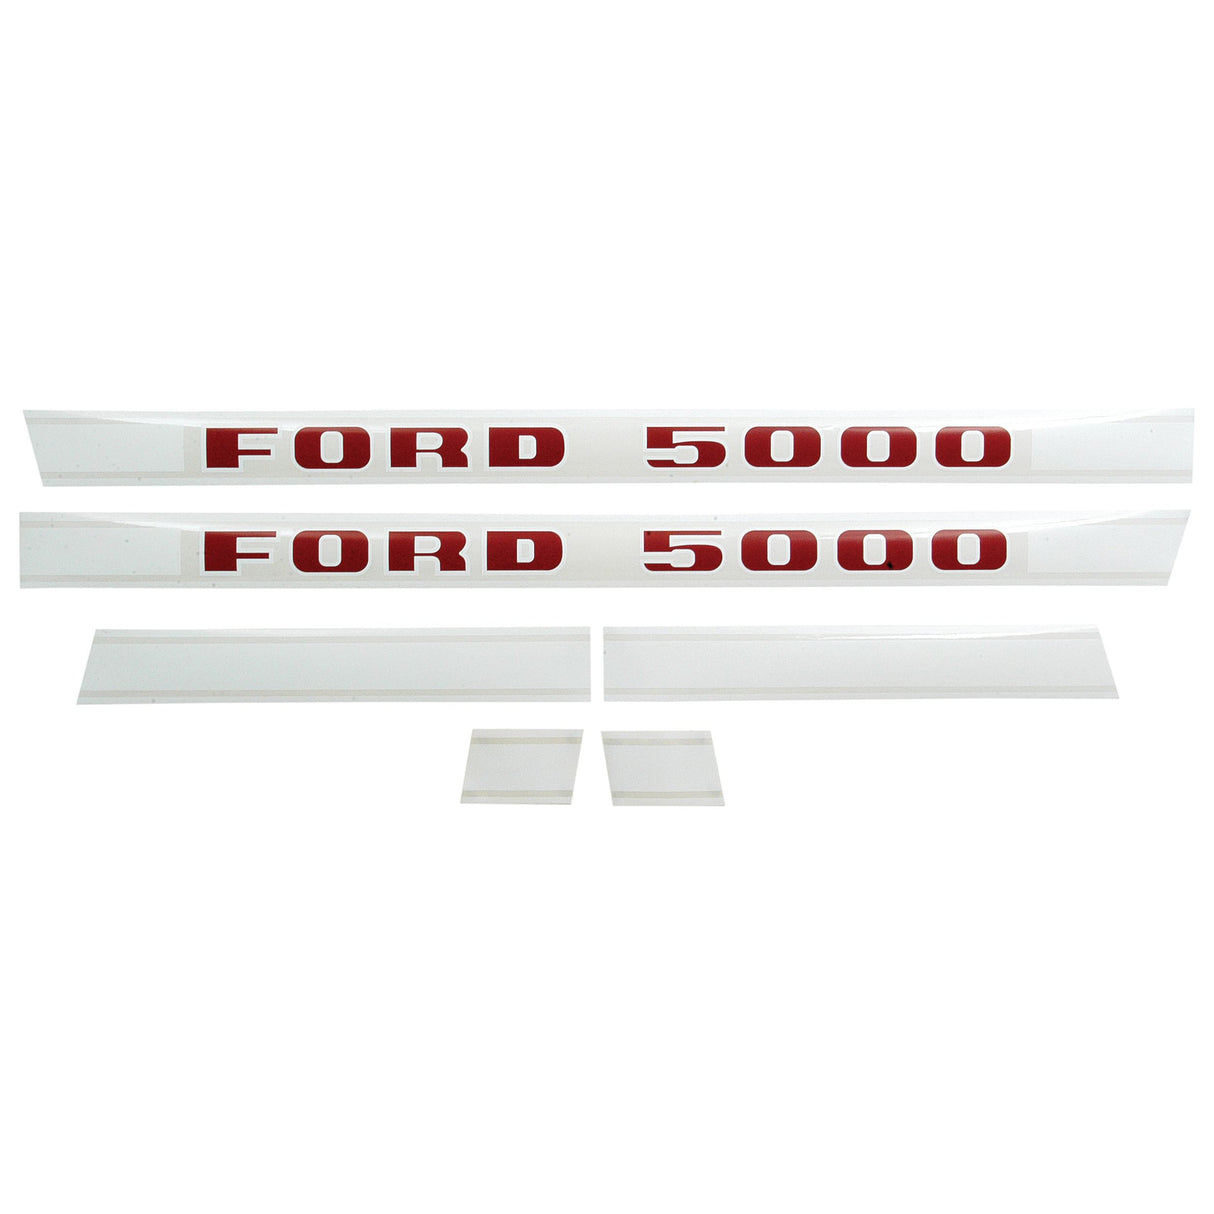 Decal Set - Ford / New Holland 5000
 - S.8412 - Massey Tractor Parts